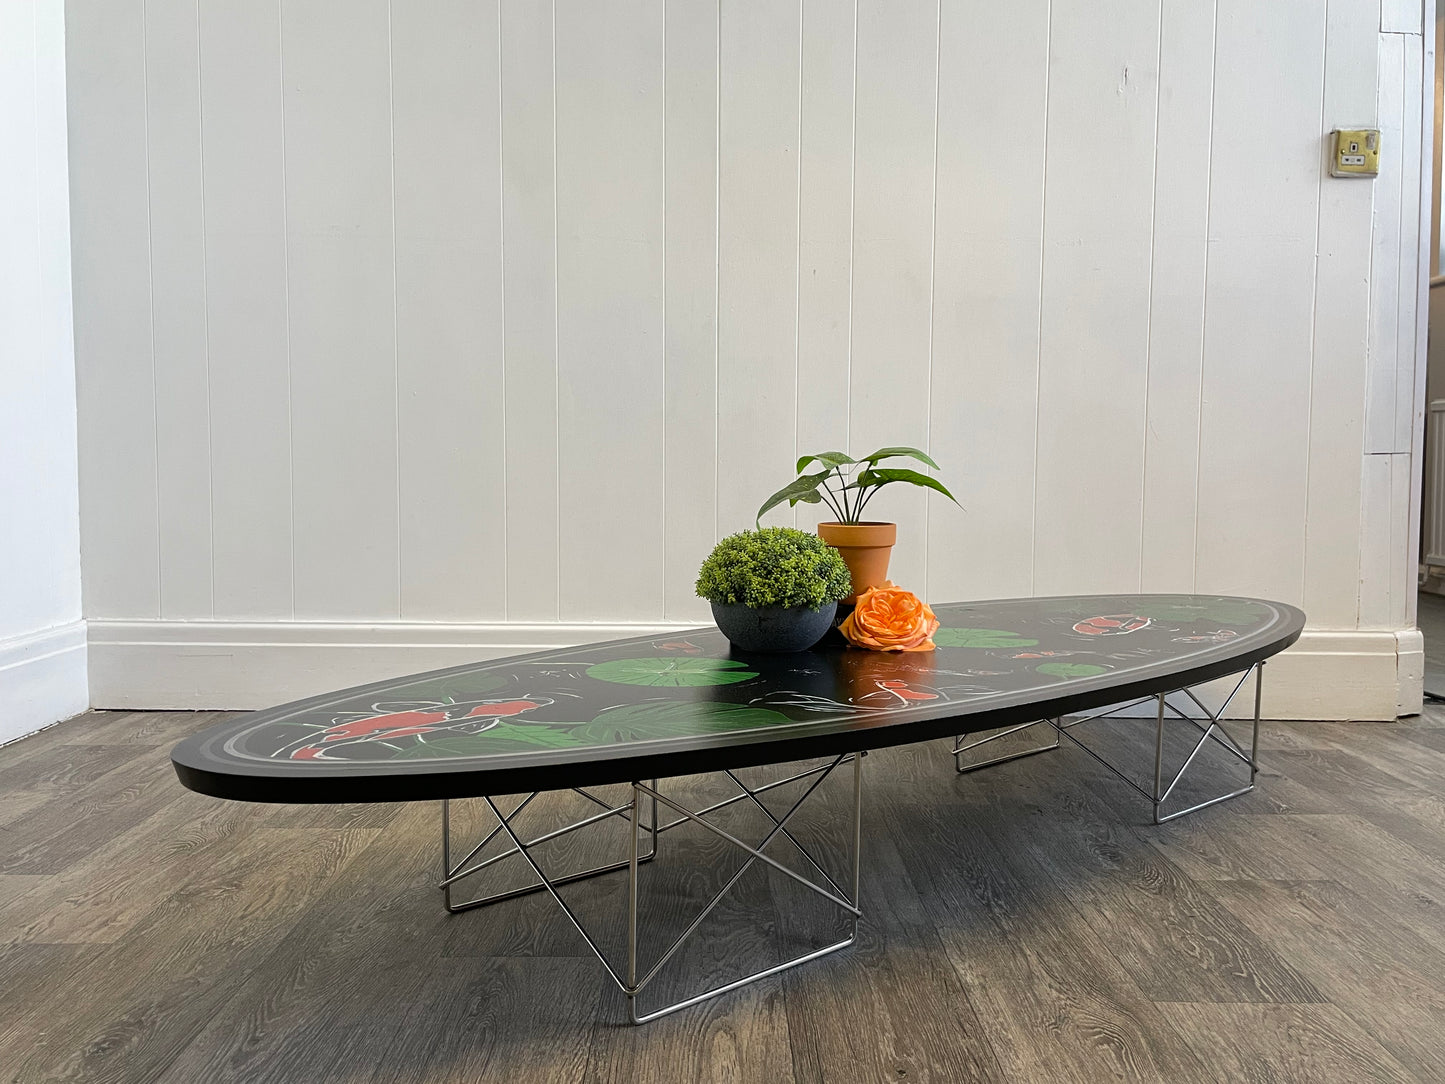 Eames ETR Low Surfboard Style Coffee Table With Koi Fish Design